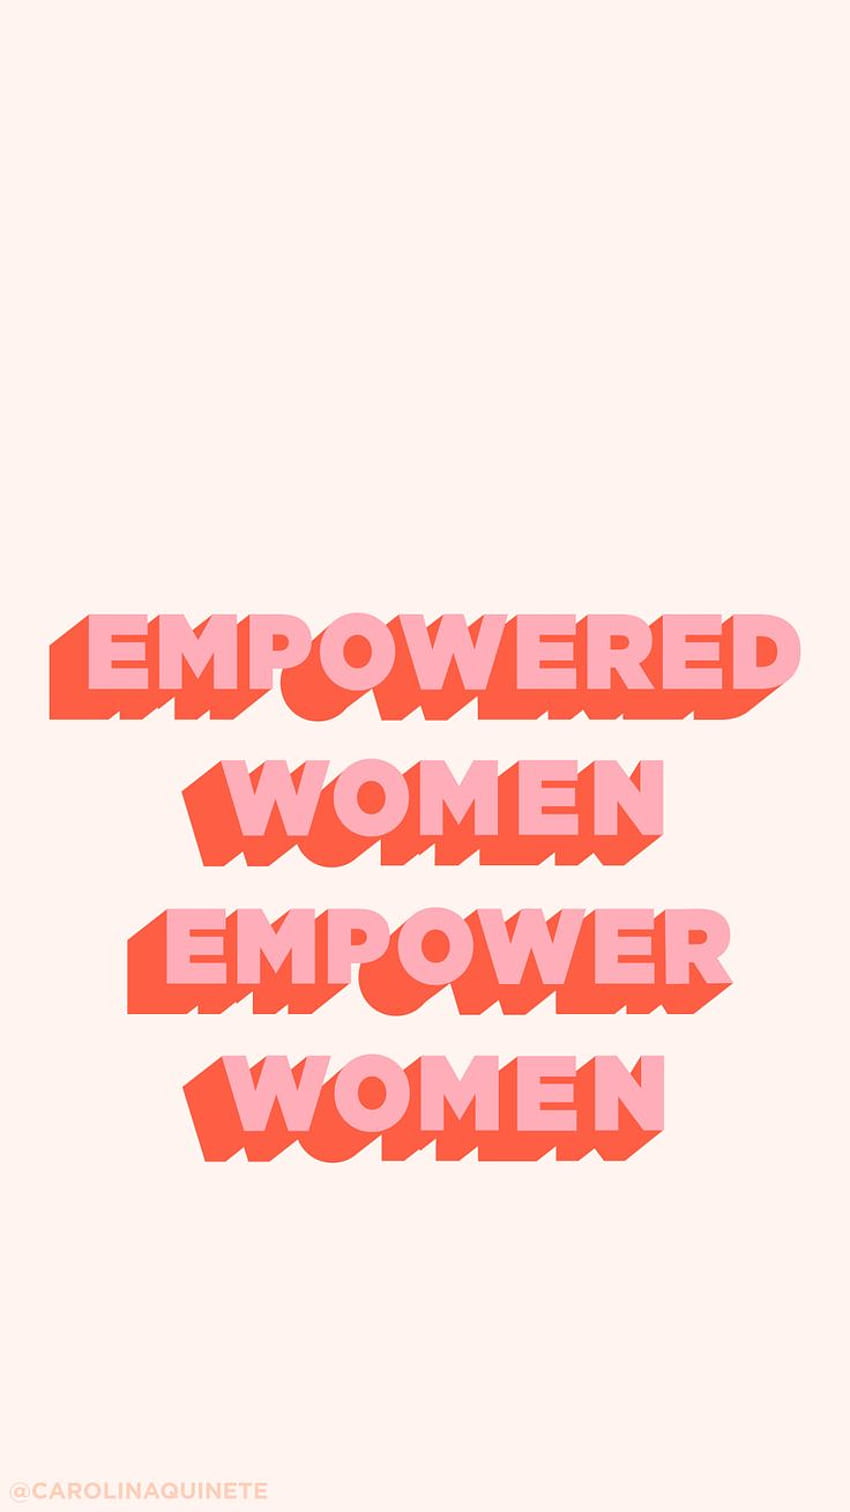 Womens Day 41 Best Womens Day For Mobile Phone. Feminist quotes, Women empowerment, International womens day quotes, Supportive HD phone wallpaper